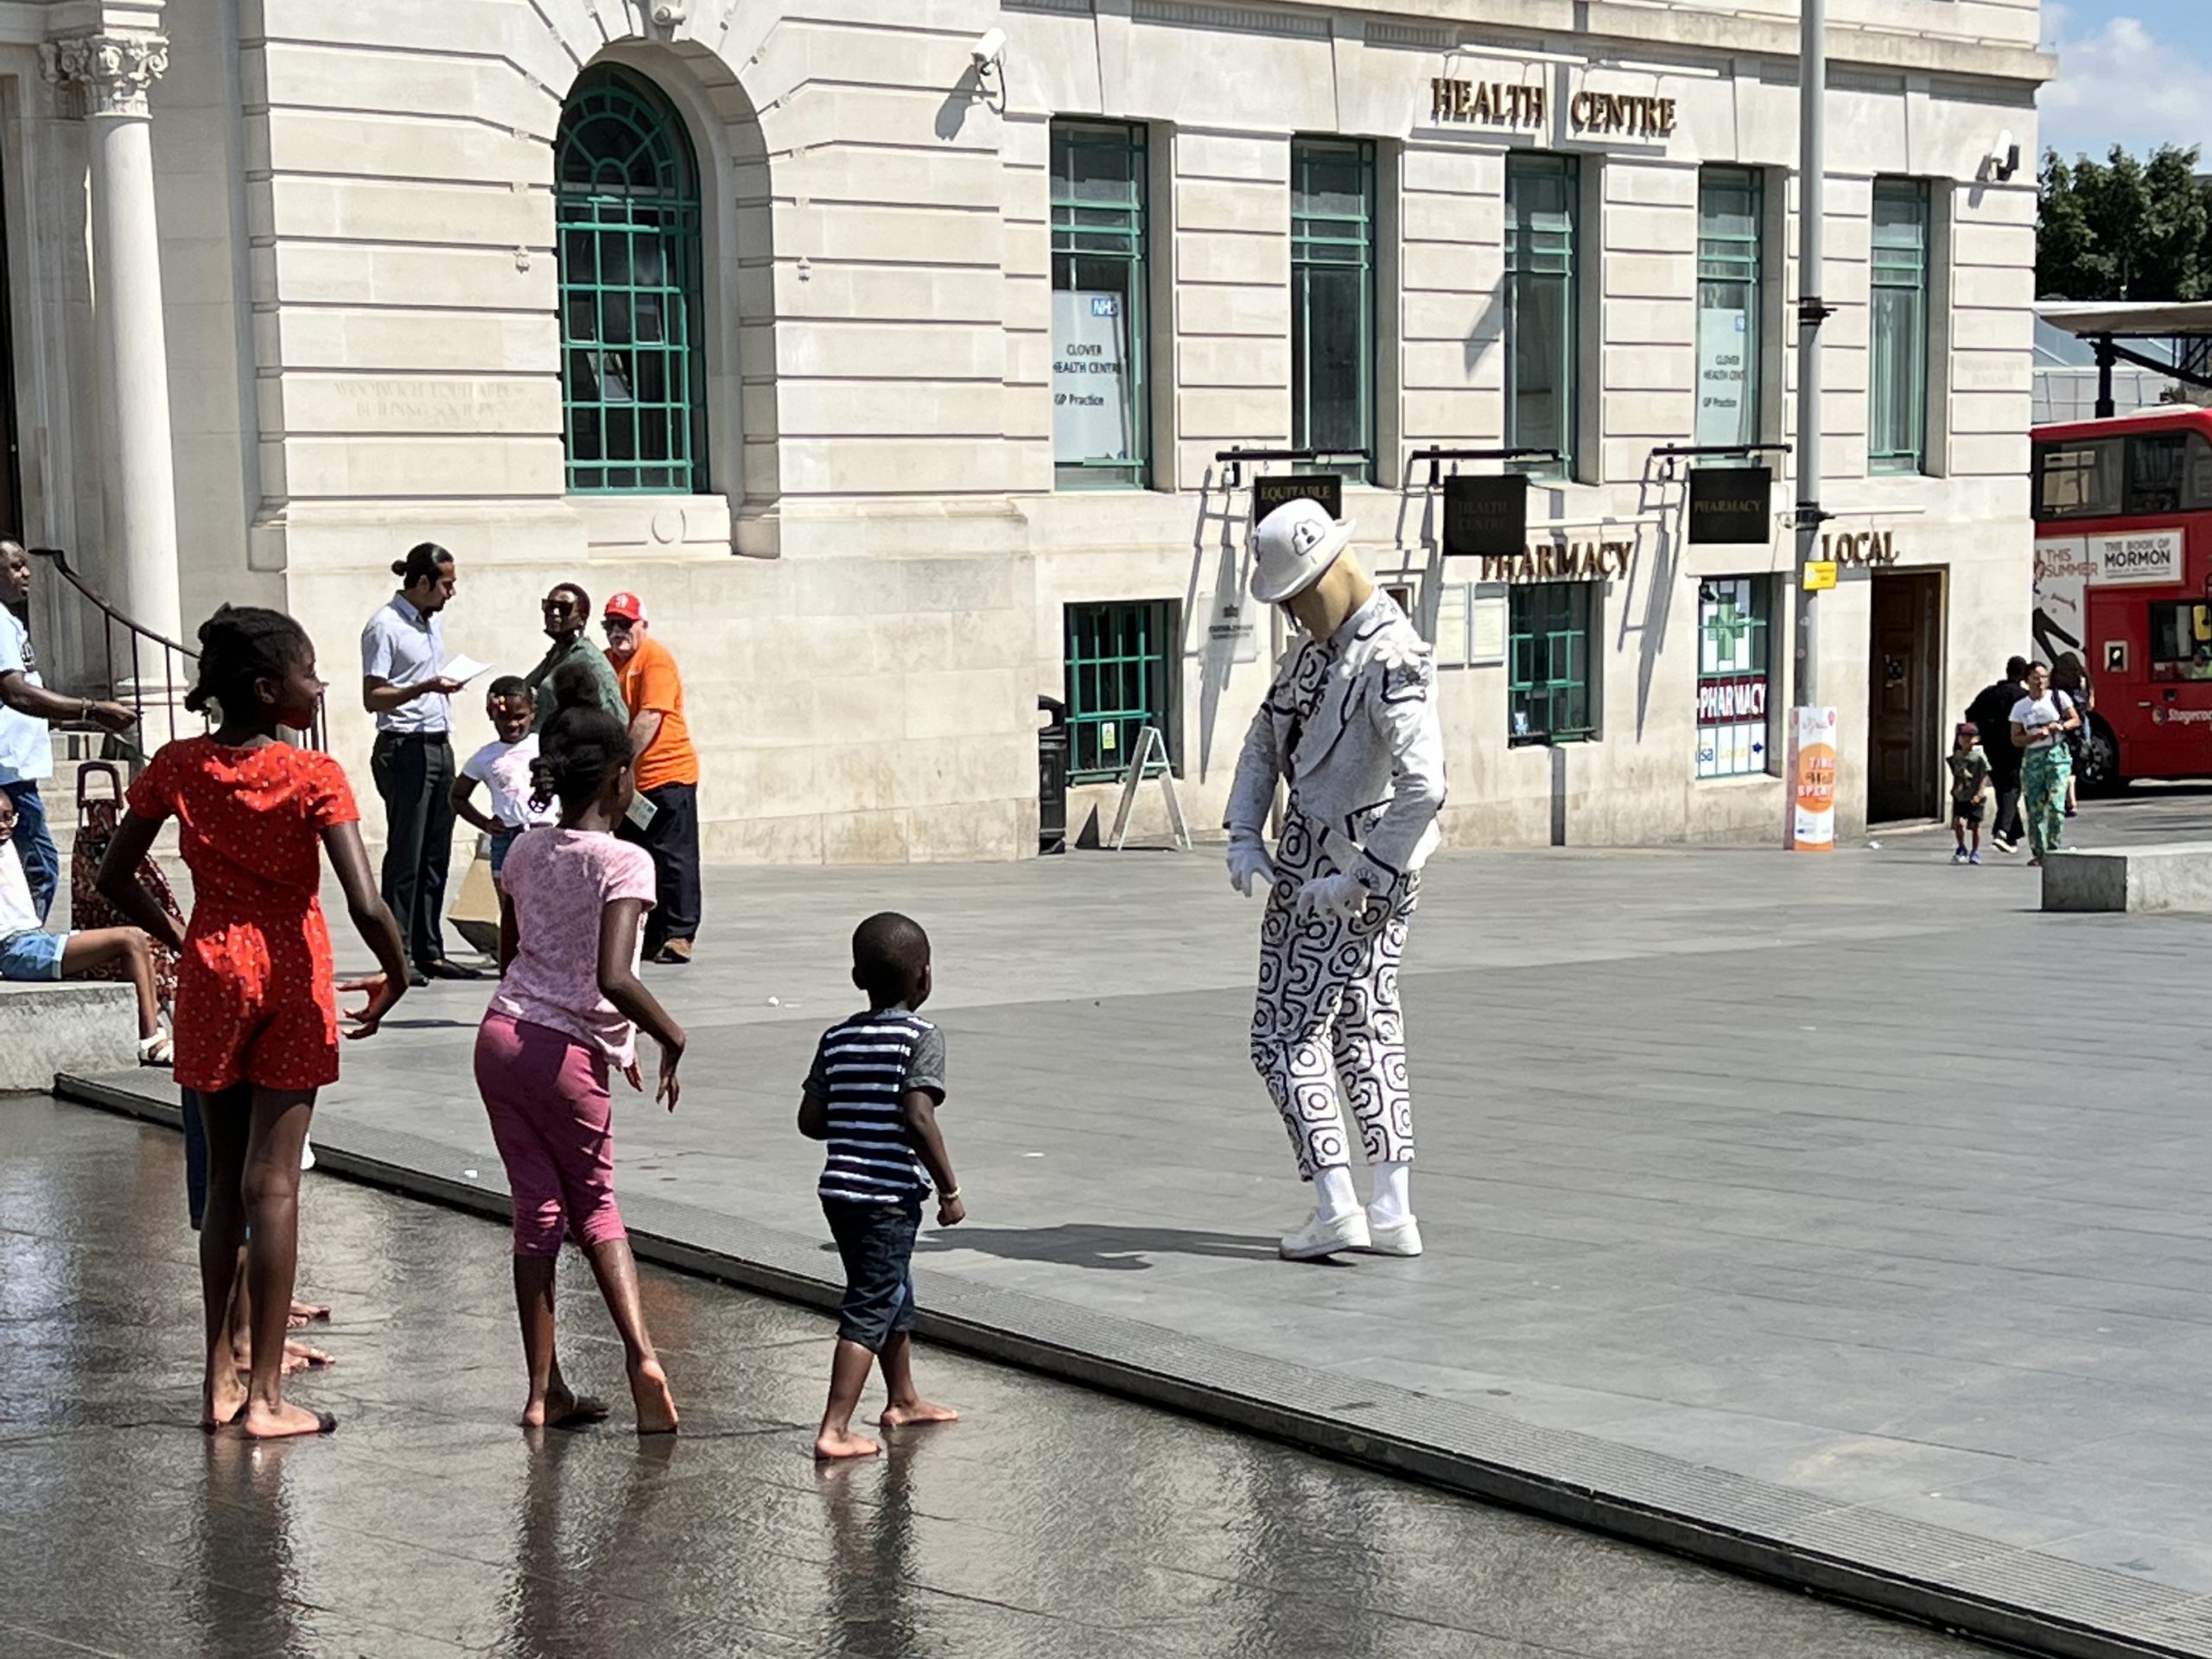 The RIDDLE in General Gordon Square. A costumed character poses in front of a group of children. He wears a white suit with a white bowler hat